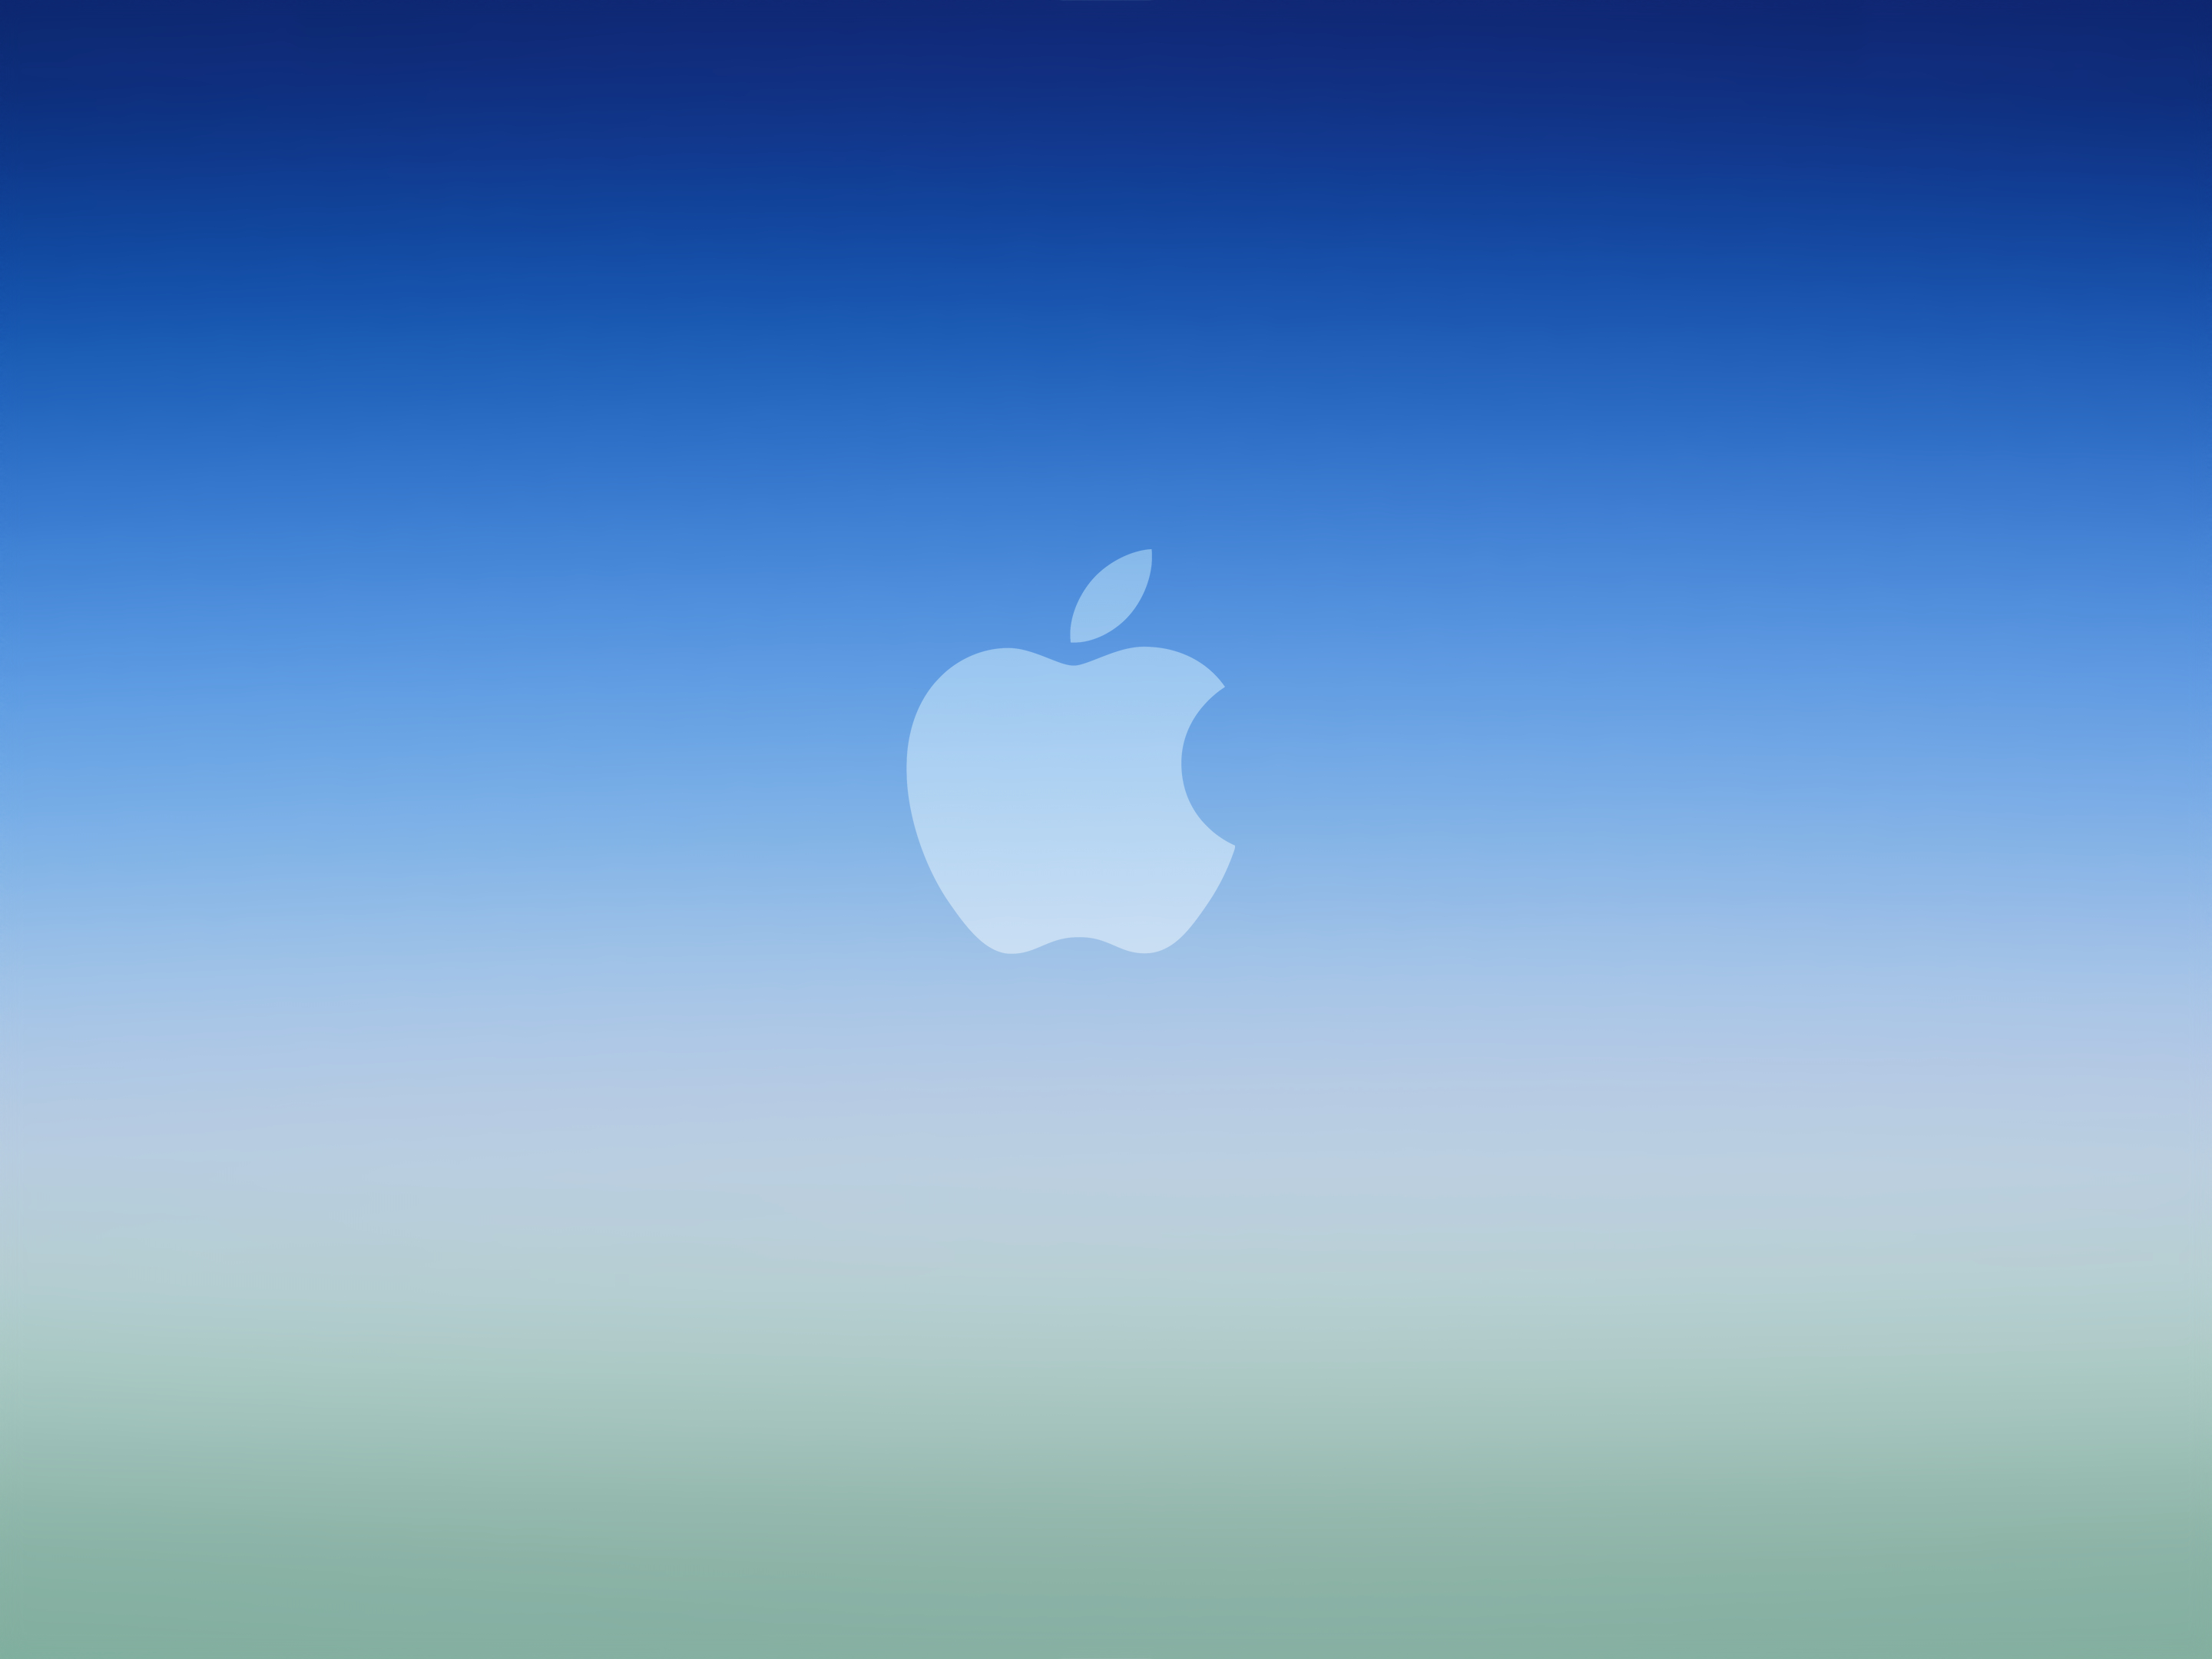 20 Excellent Apple Logo Wallpapers